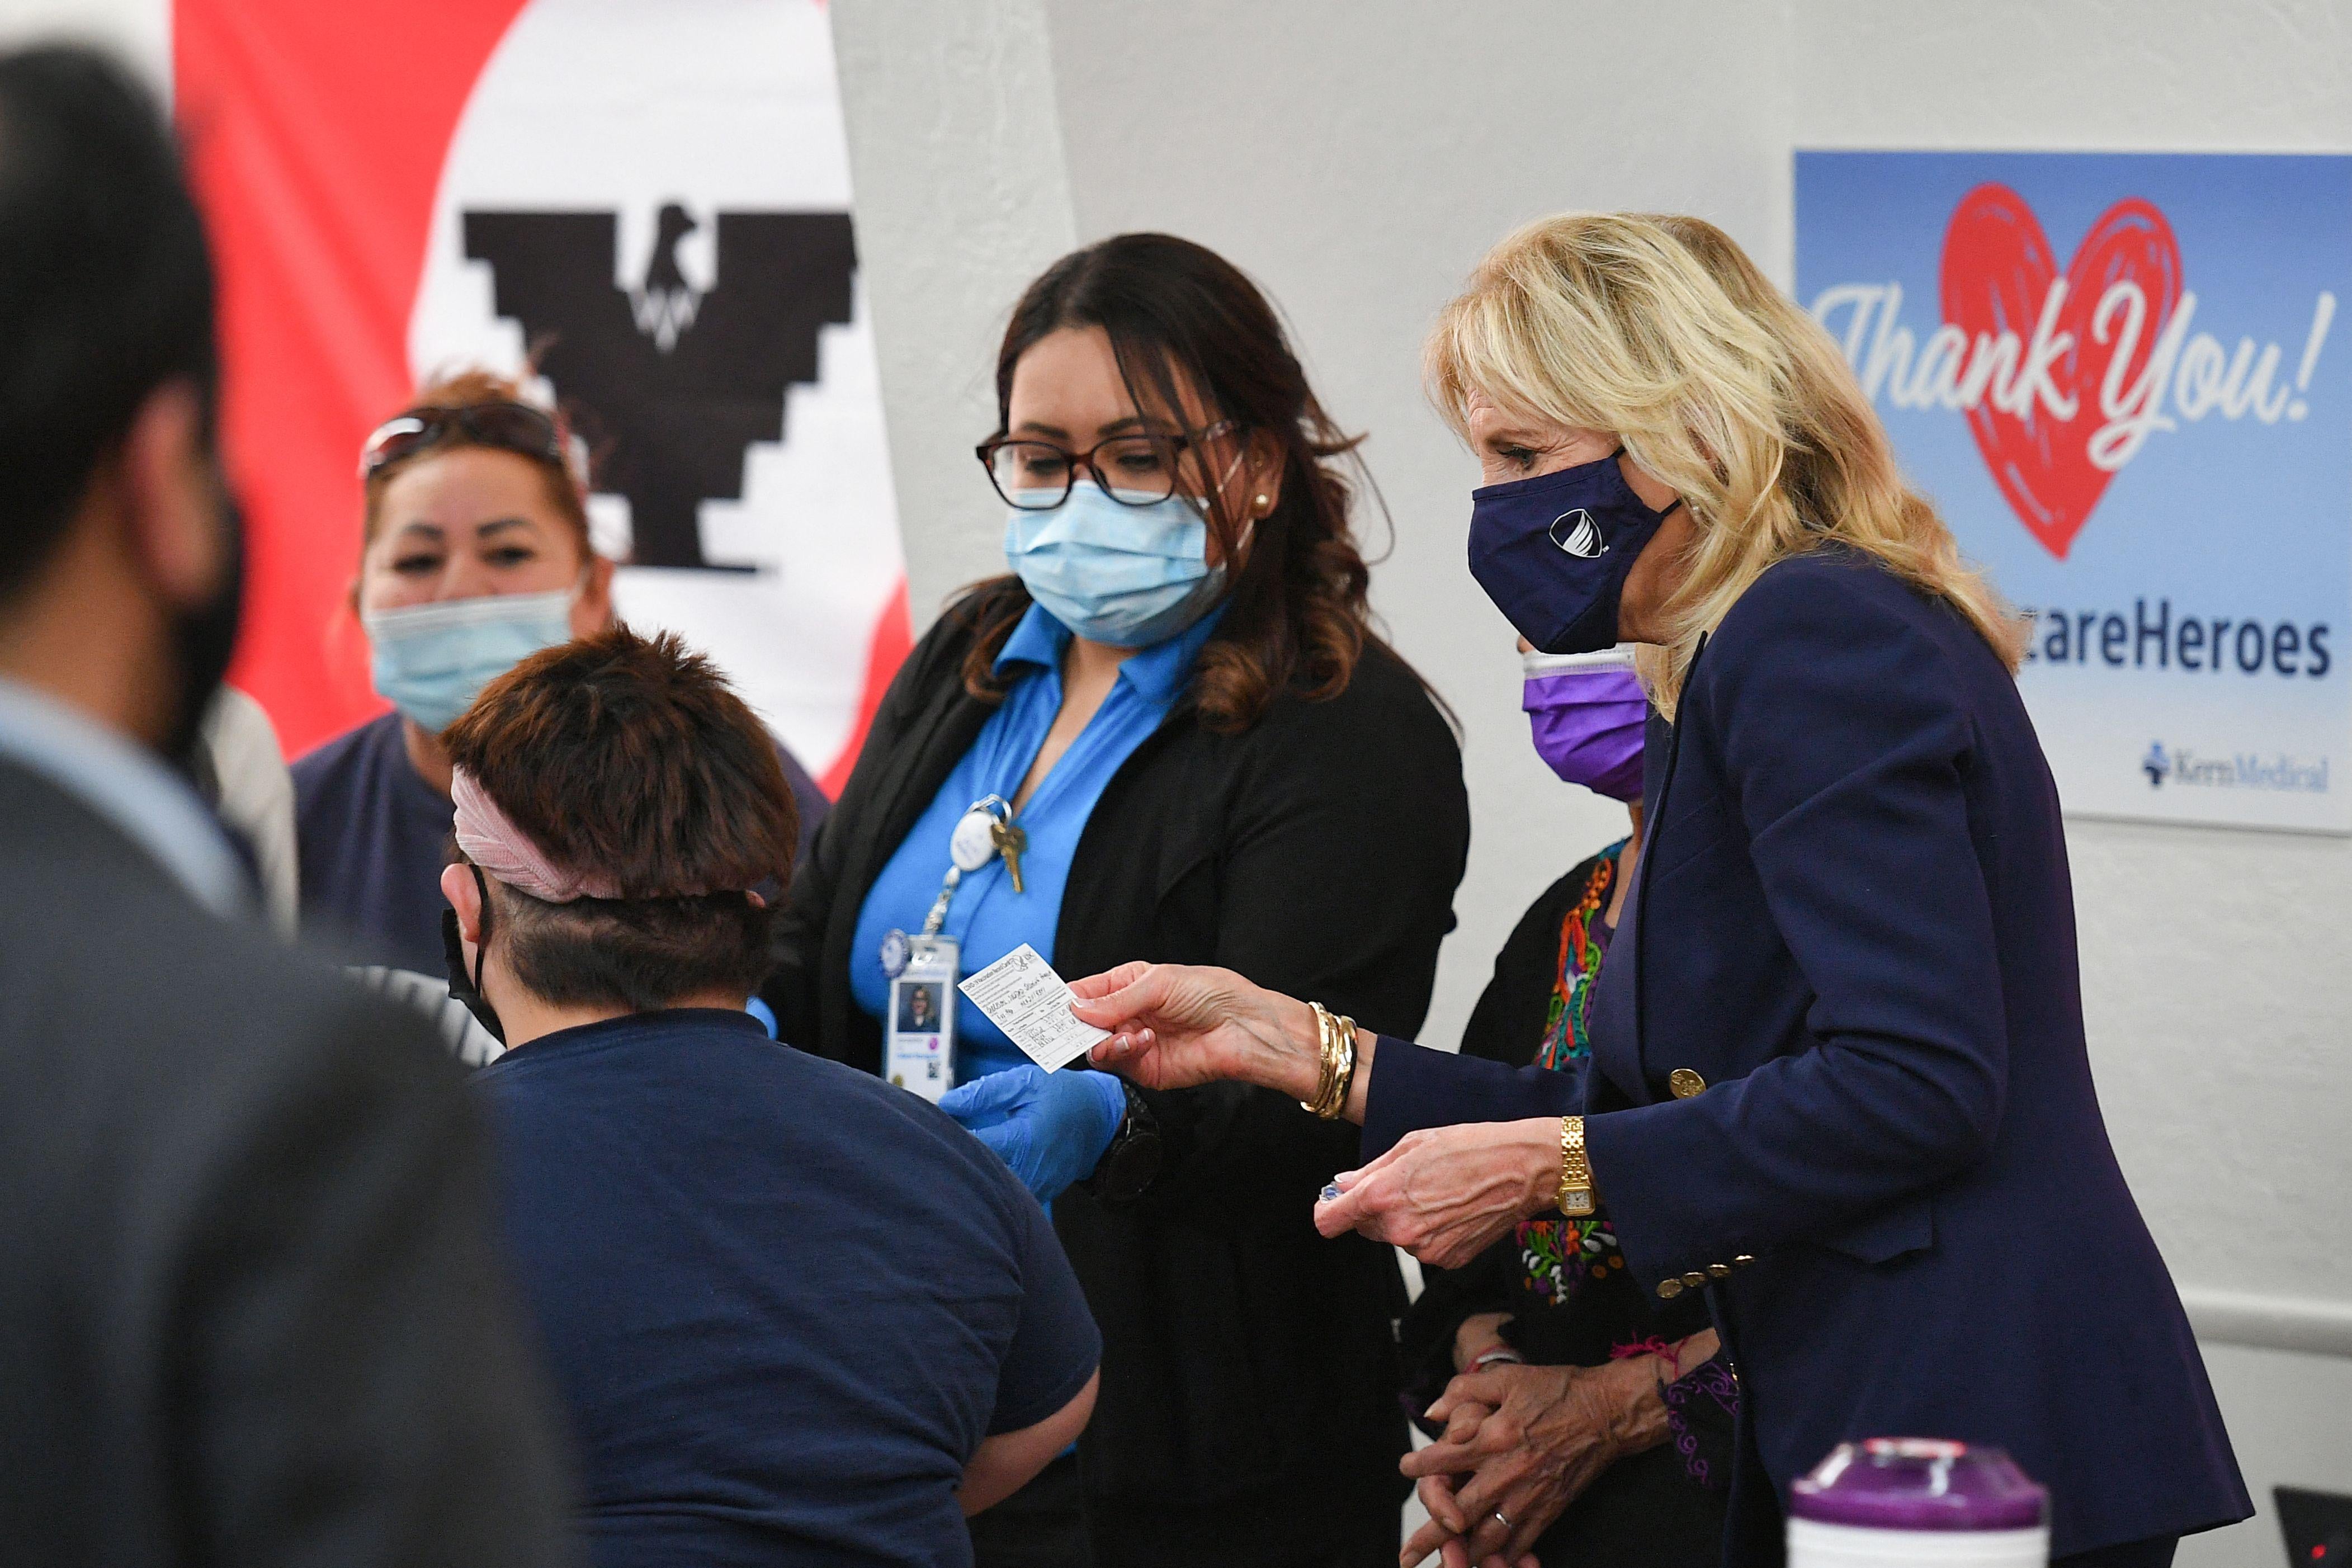 Masked health care workers standing next to Jill Biden, who holds a vaccination card.